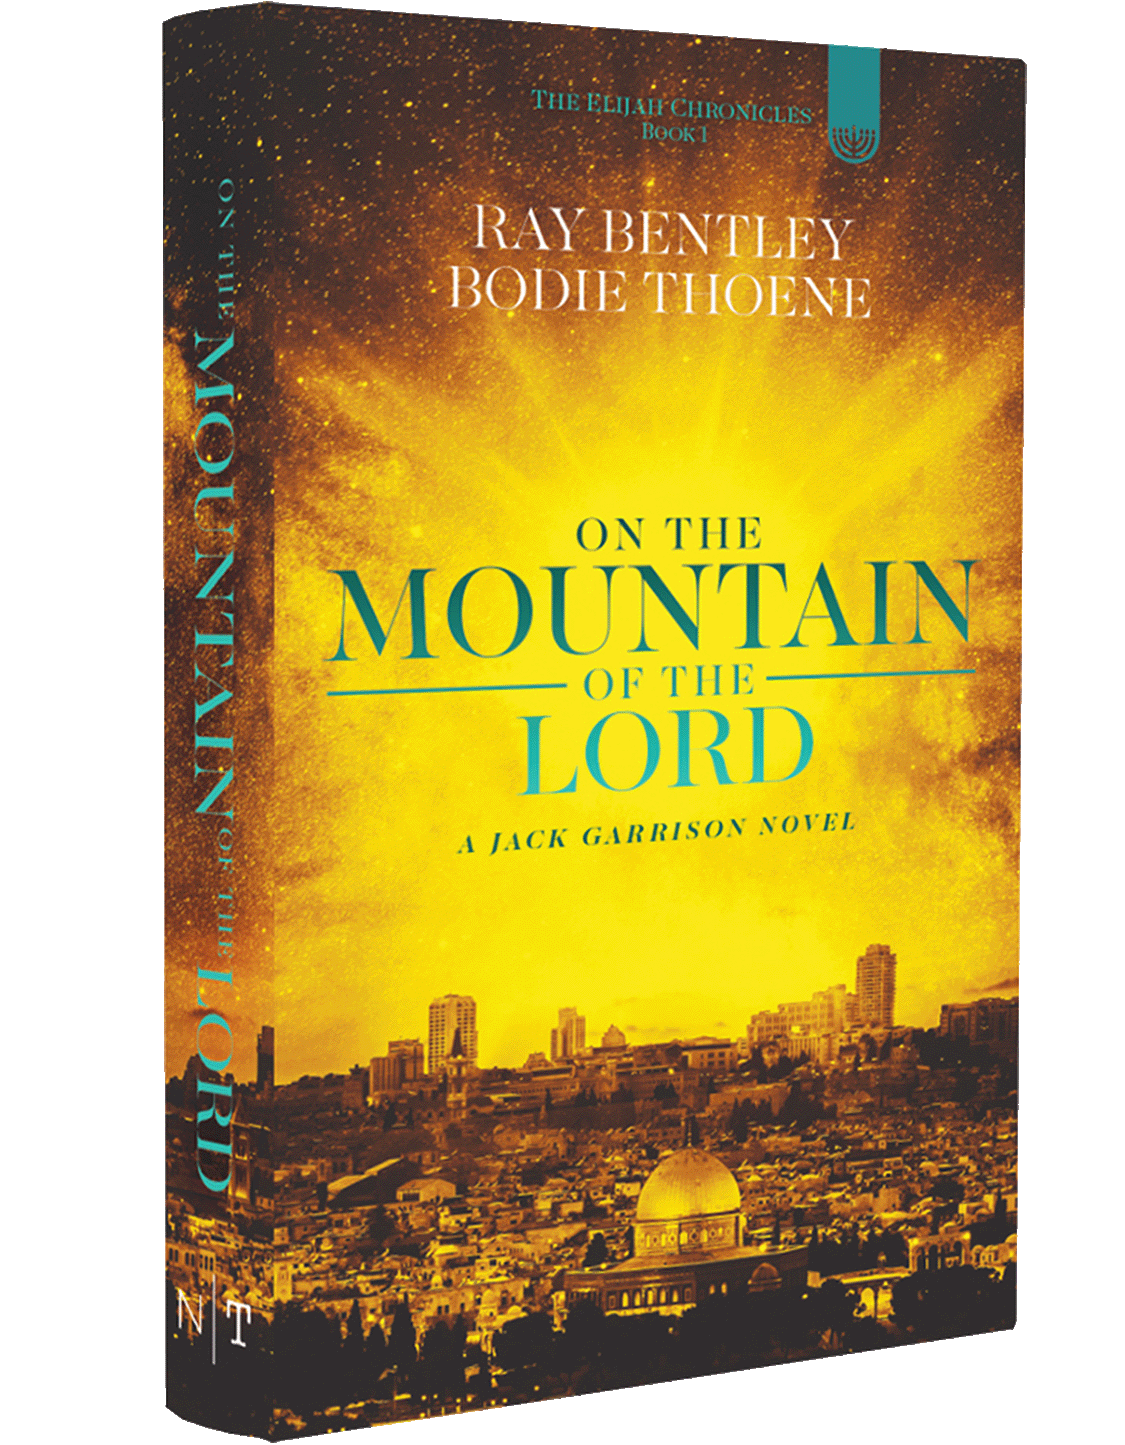 On the Mountain of the Lord